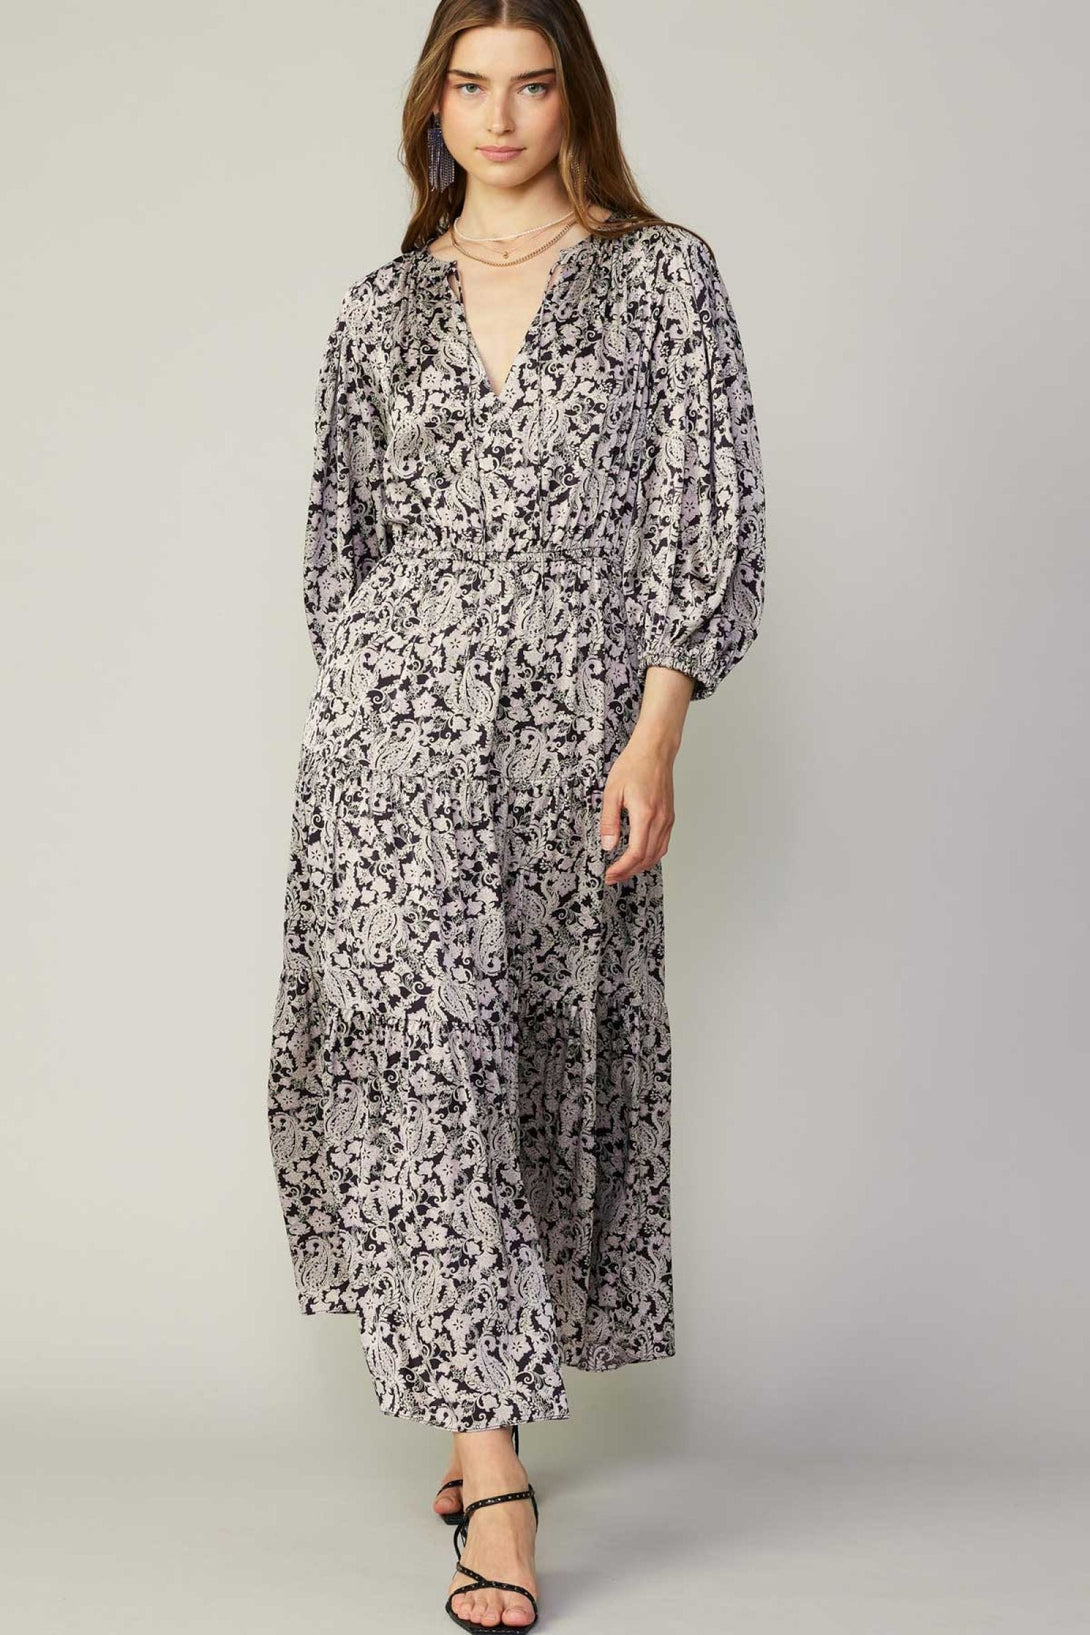 Current Air Long Sleeve Dress With Split Neck